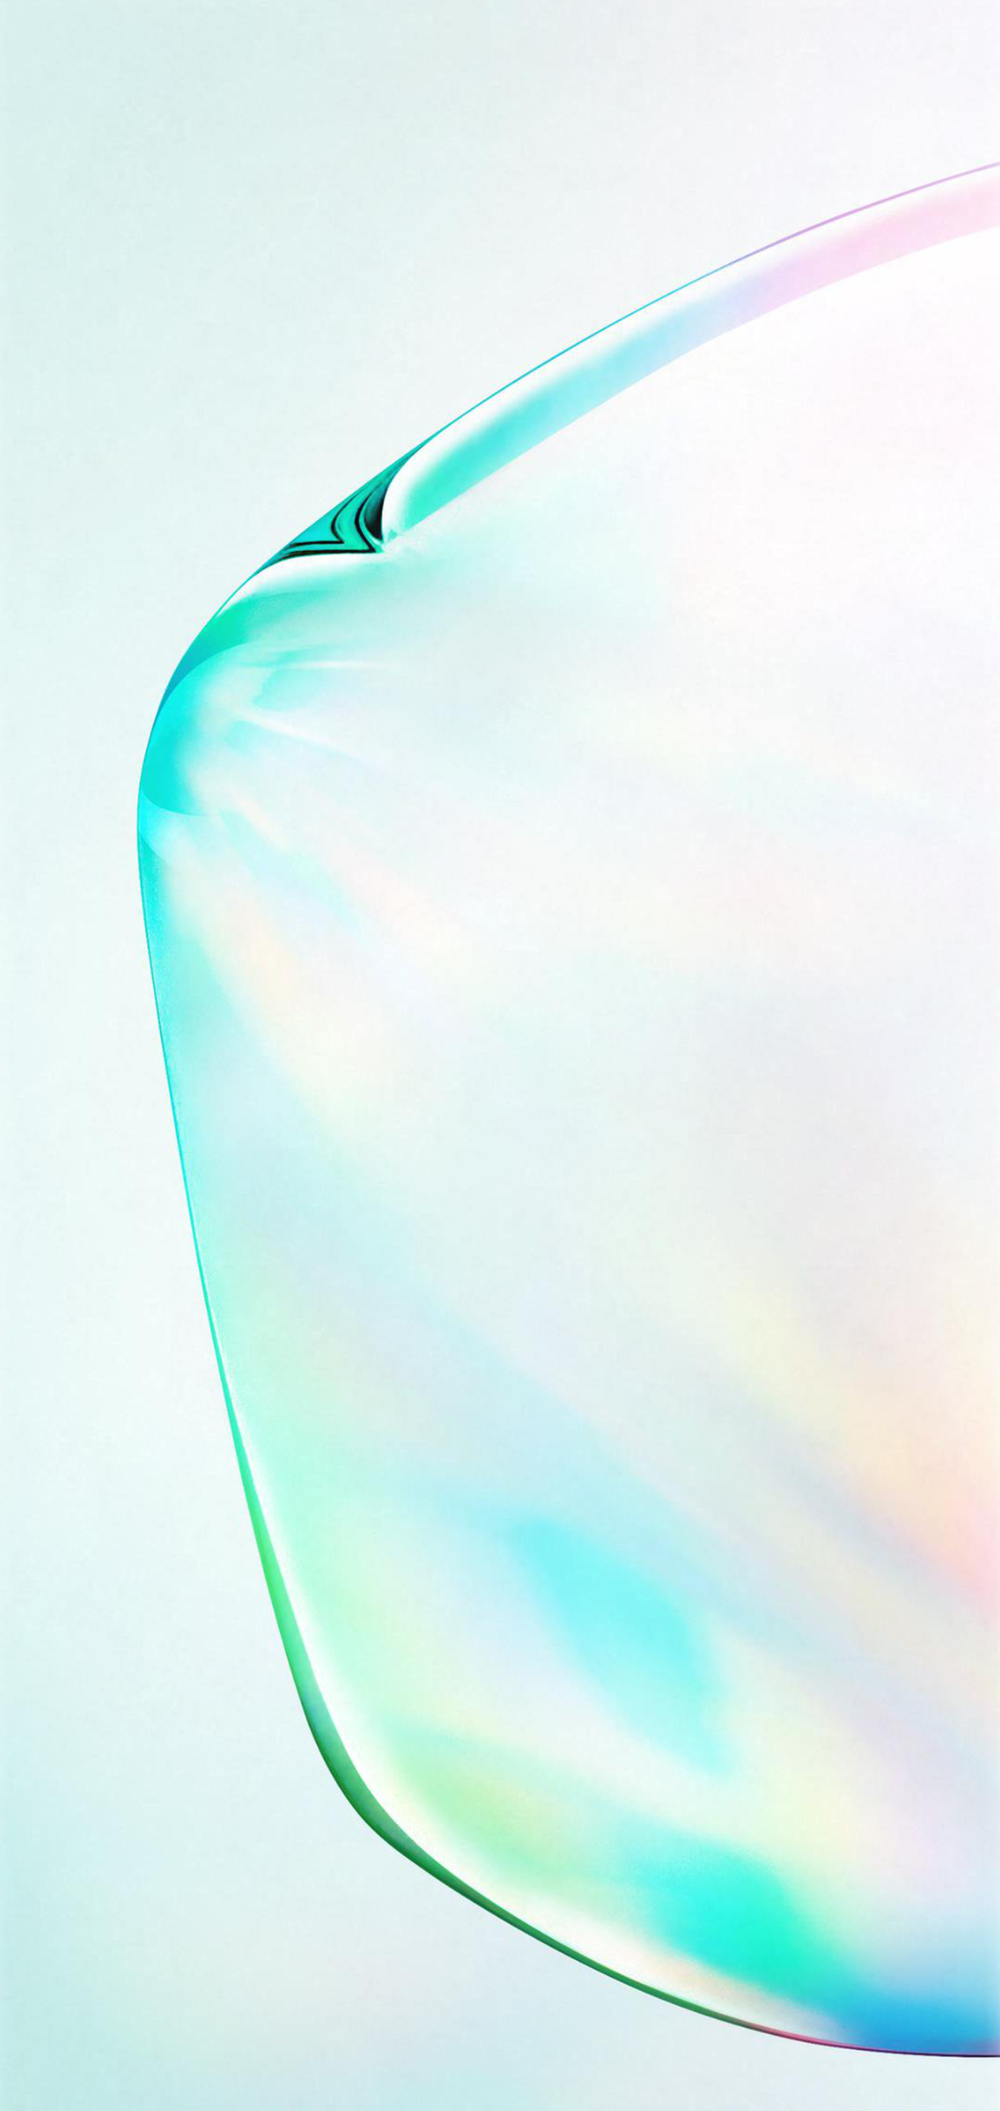 Galaxy Note 10 the wallpaper